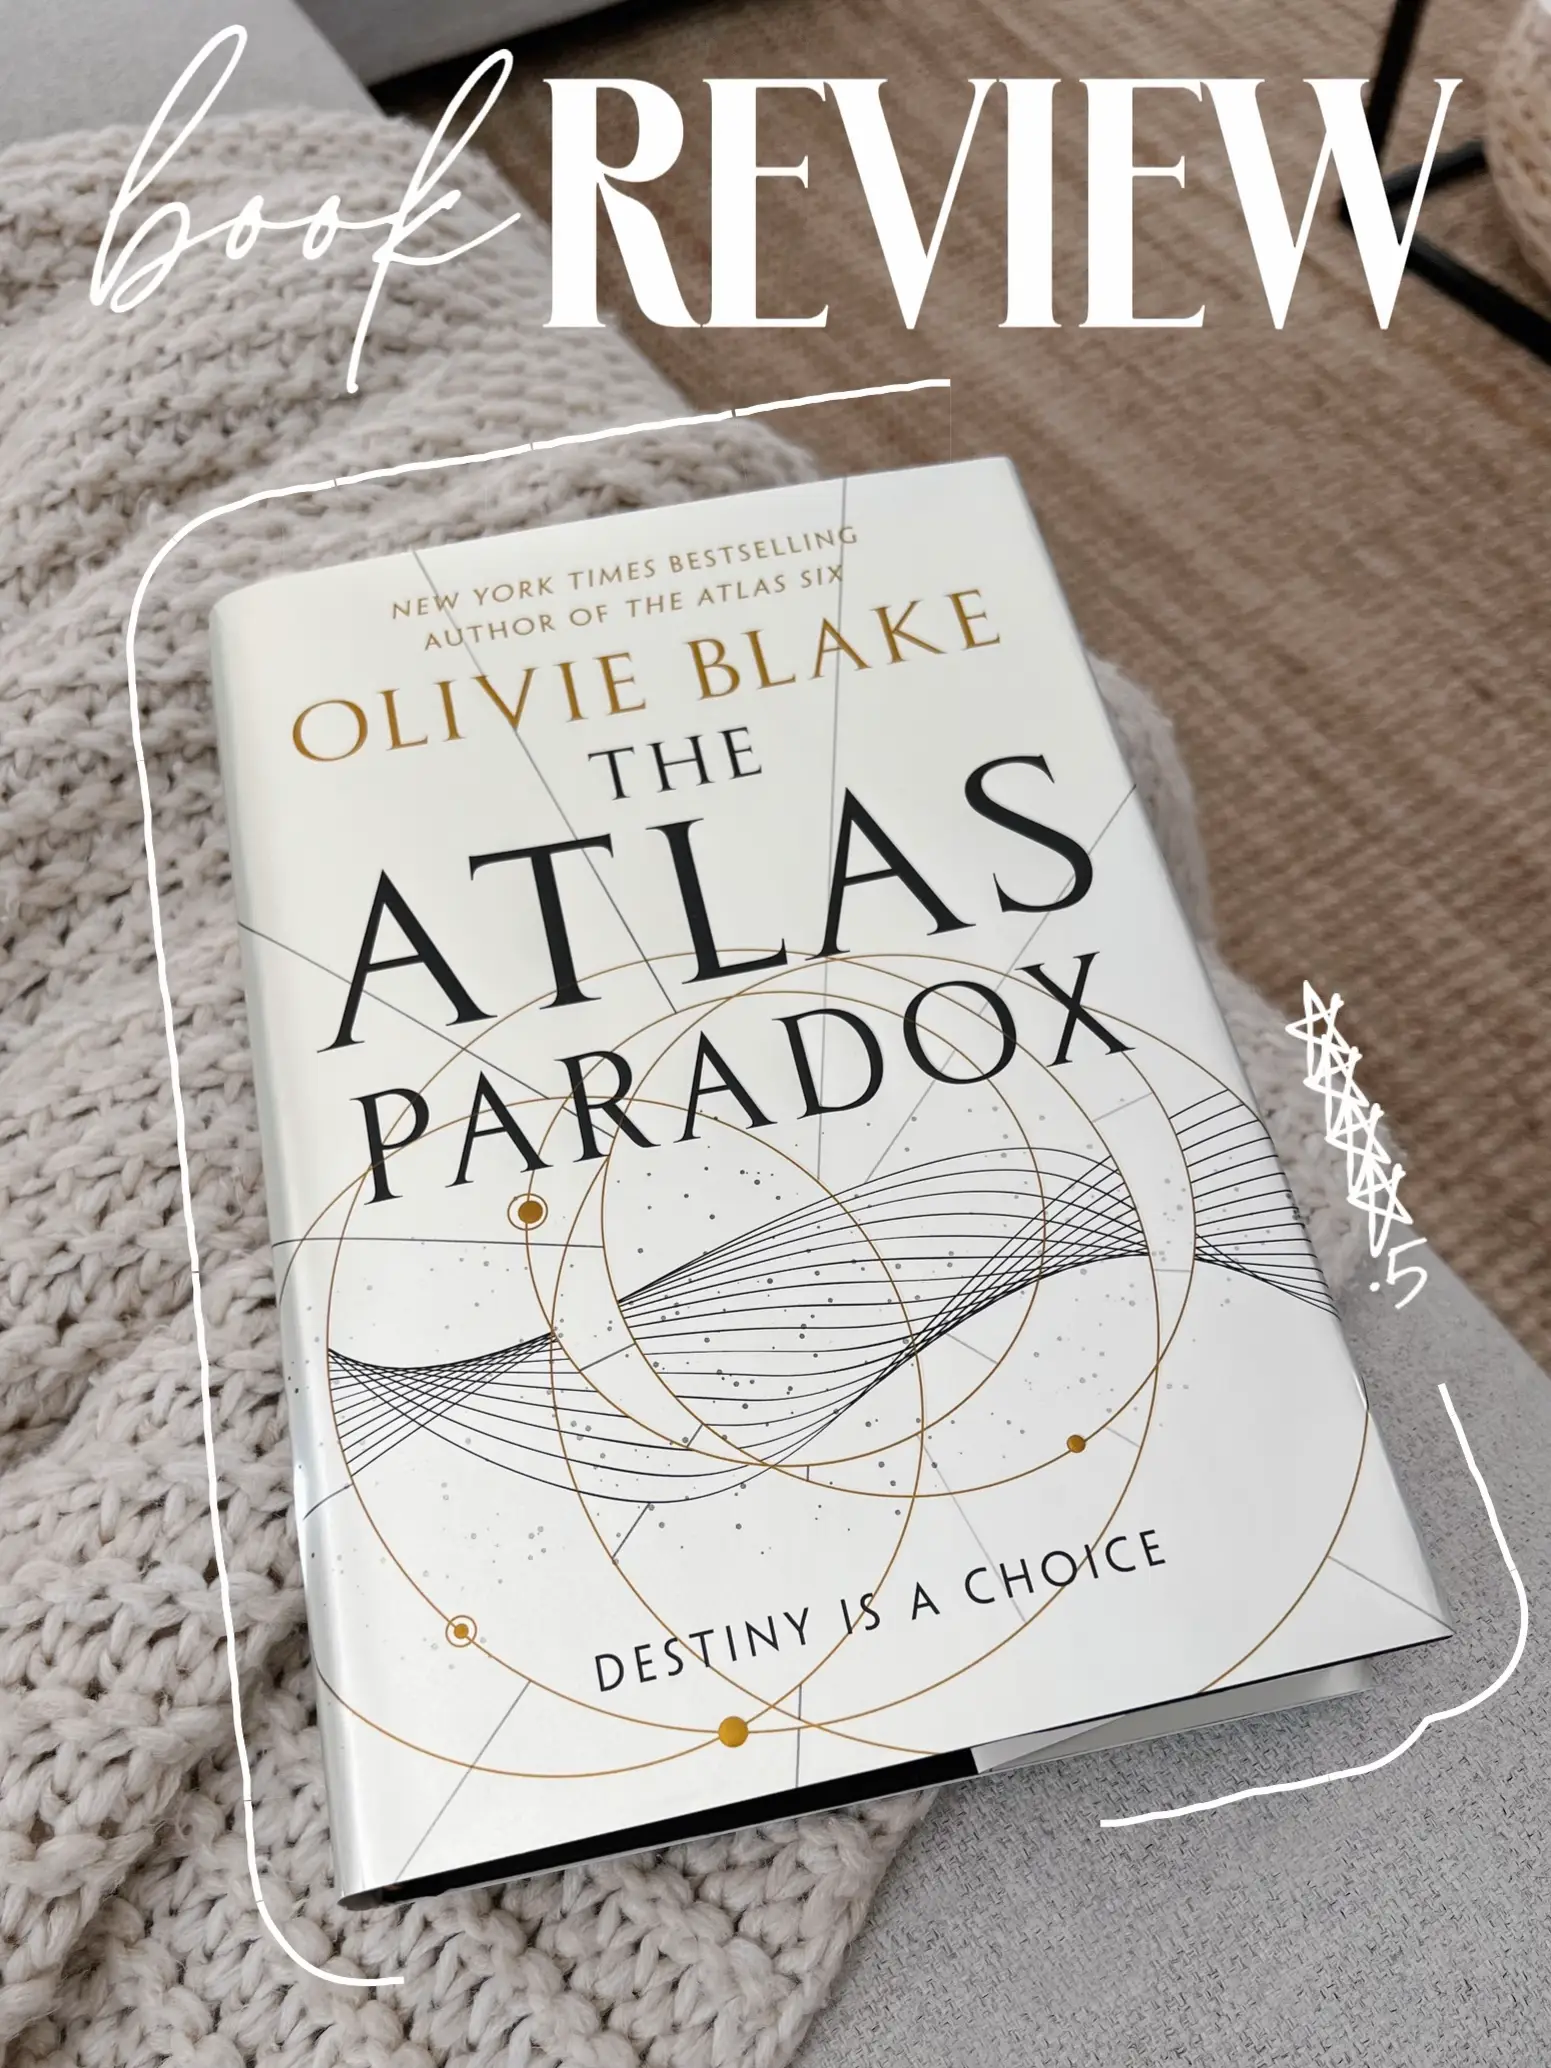 Illumicrate Exclusive: The Atlas Paradox by Olivie Blake - Illumicrate